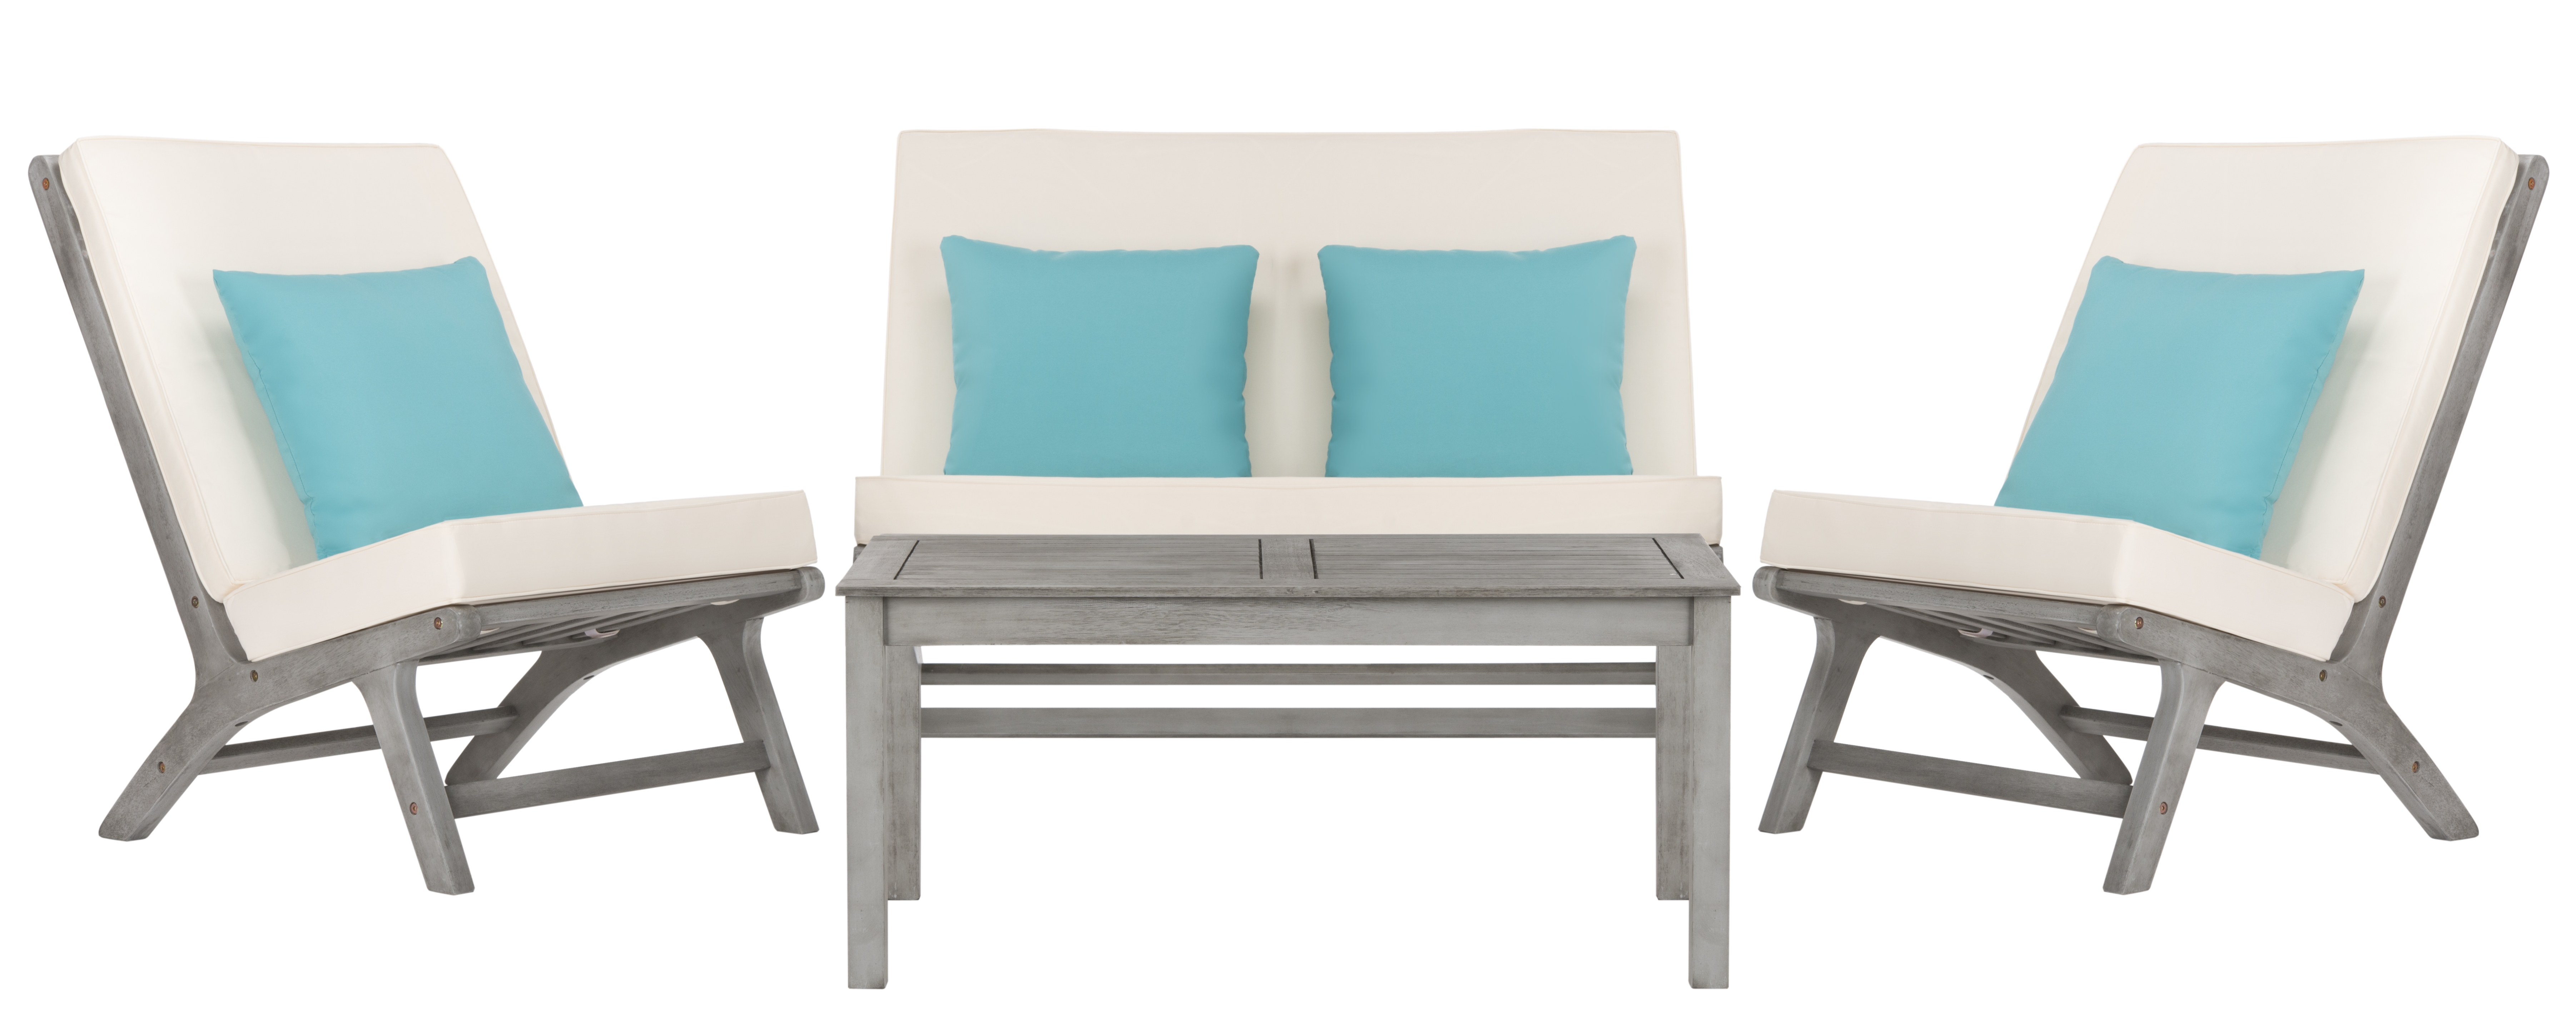 Chaston 4 Pc Outdoor Living Set With Accent Pillows - Grey Wash/White/Light Blue - Arlo Home - Image 0